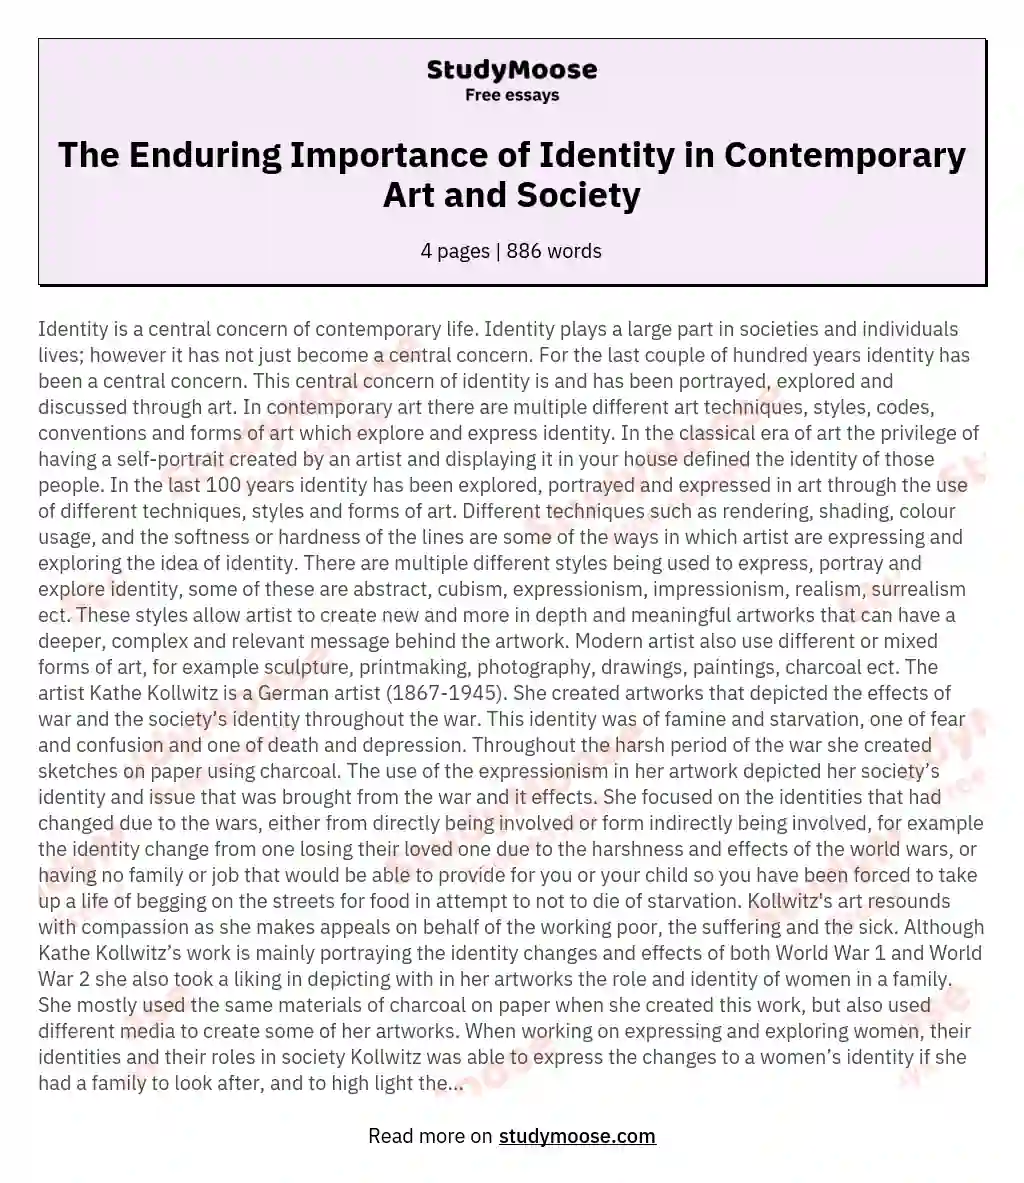 The Enduring Importance of Identity in Contemporary Art and Society essay